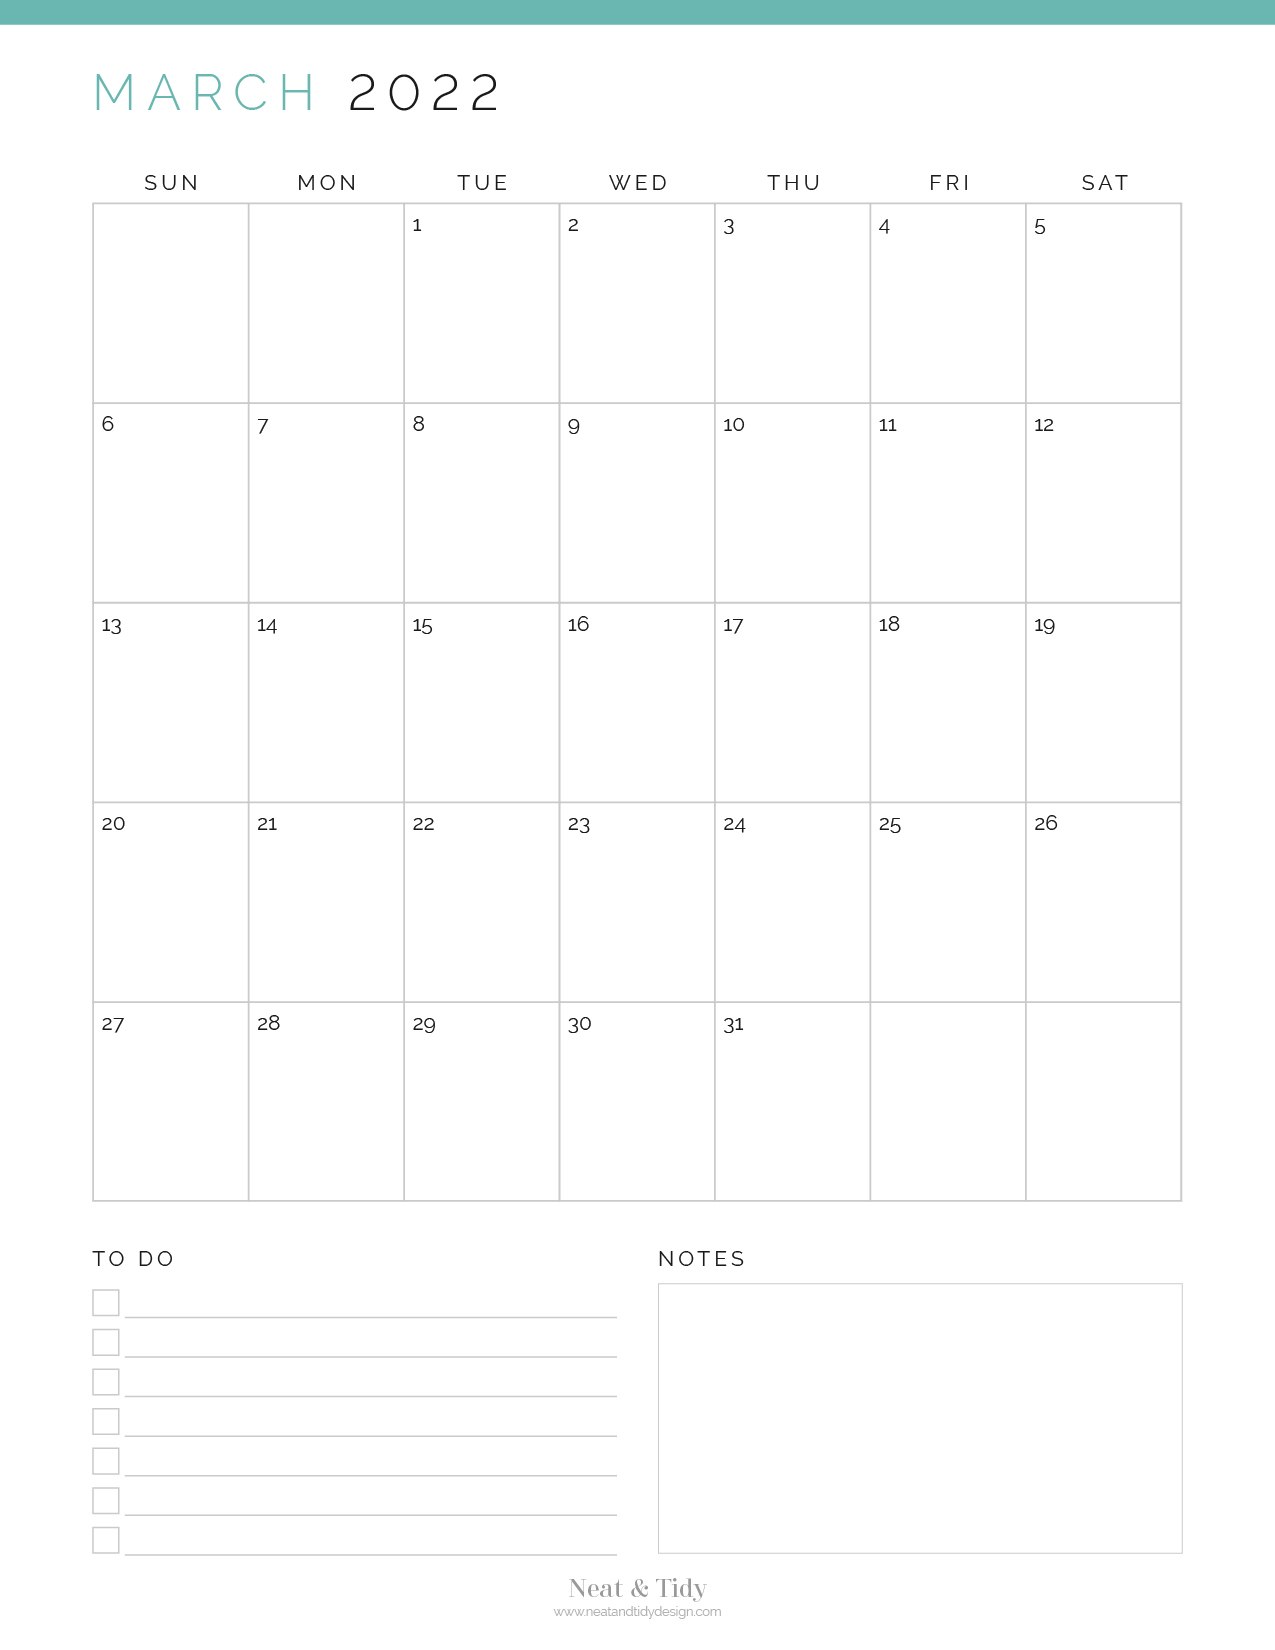 2022 Monthly Calendar - Neat and Tidy Design